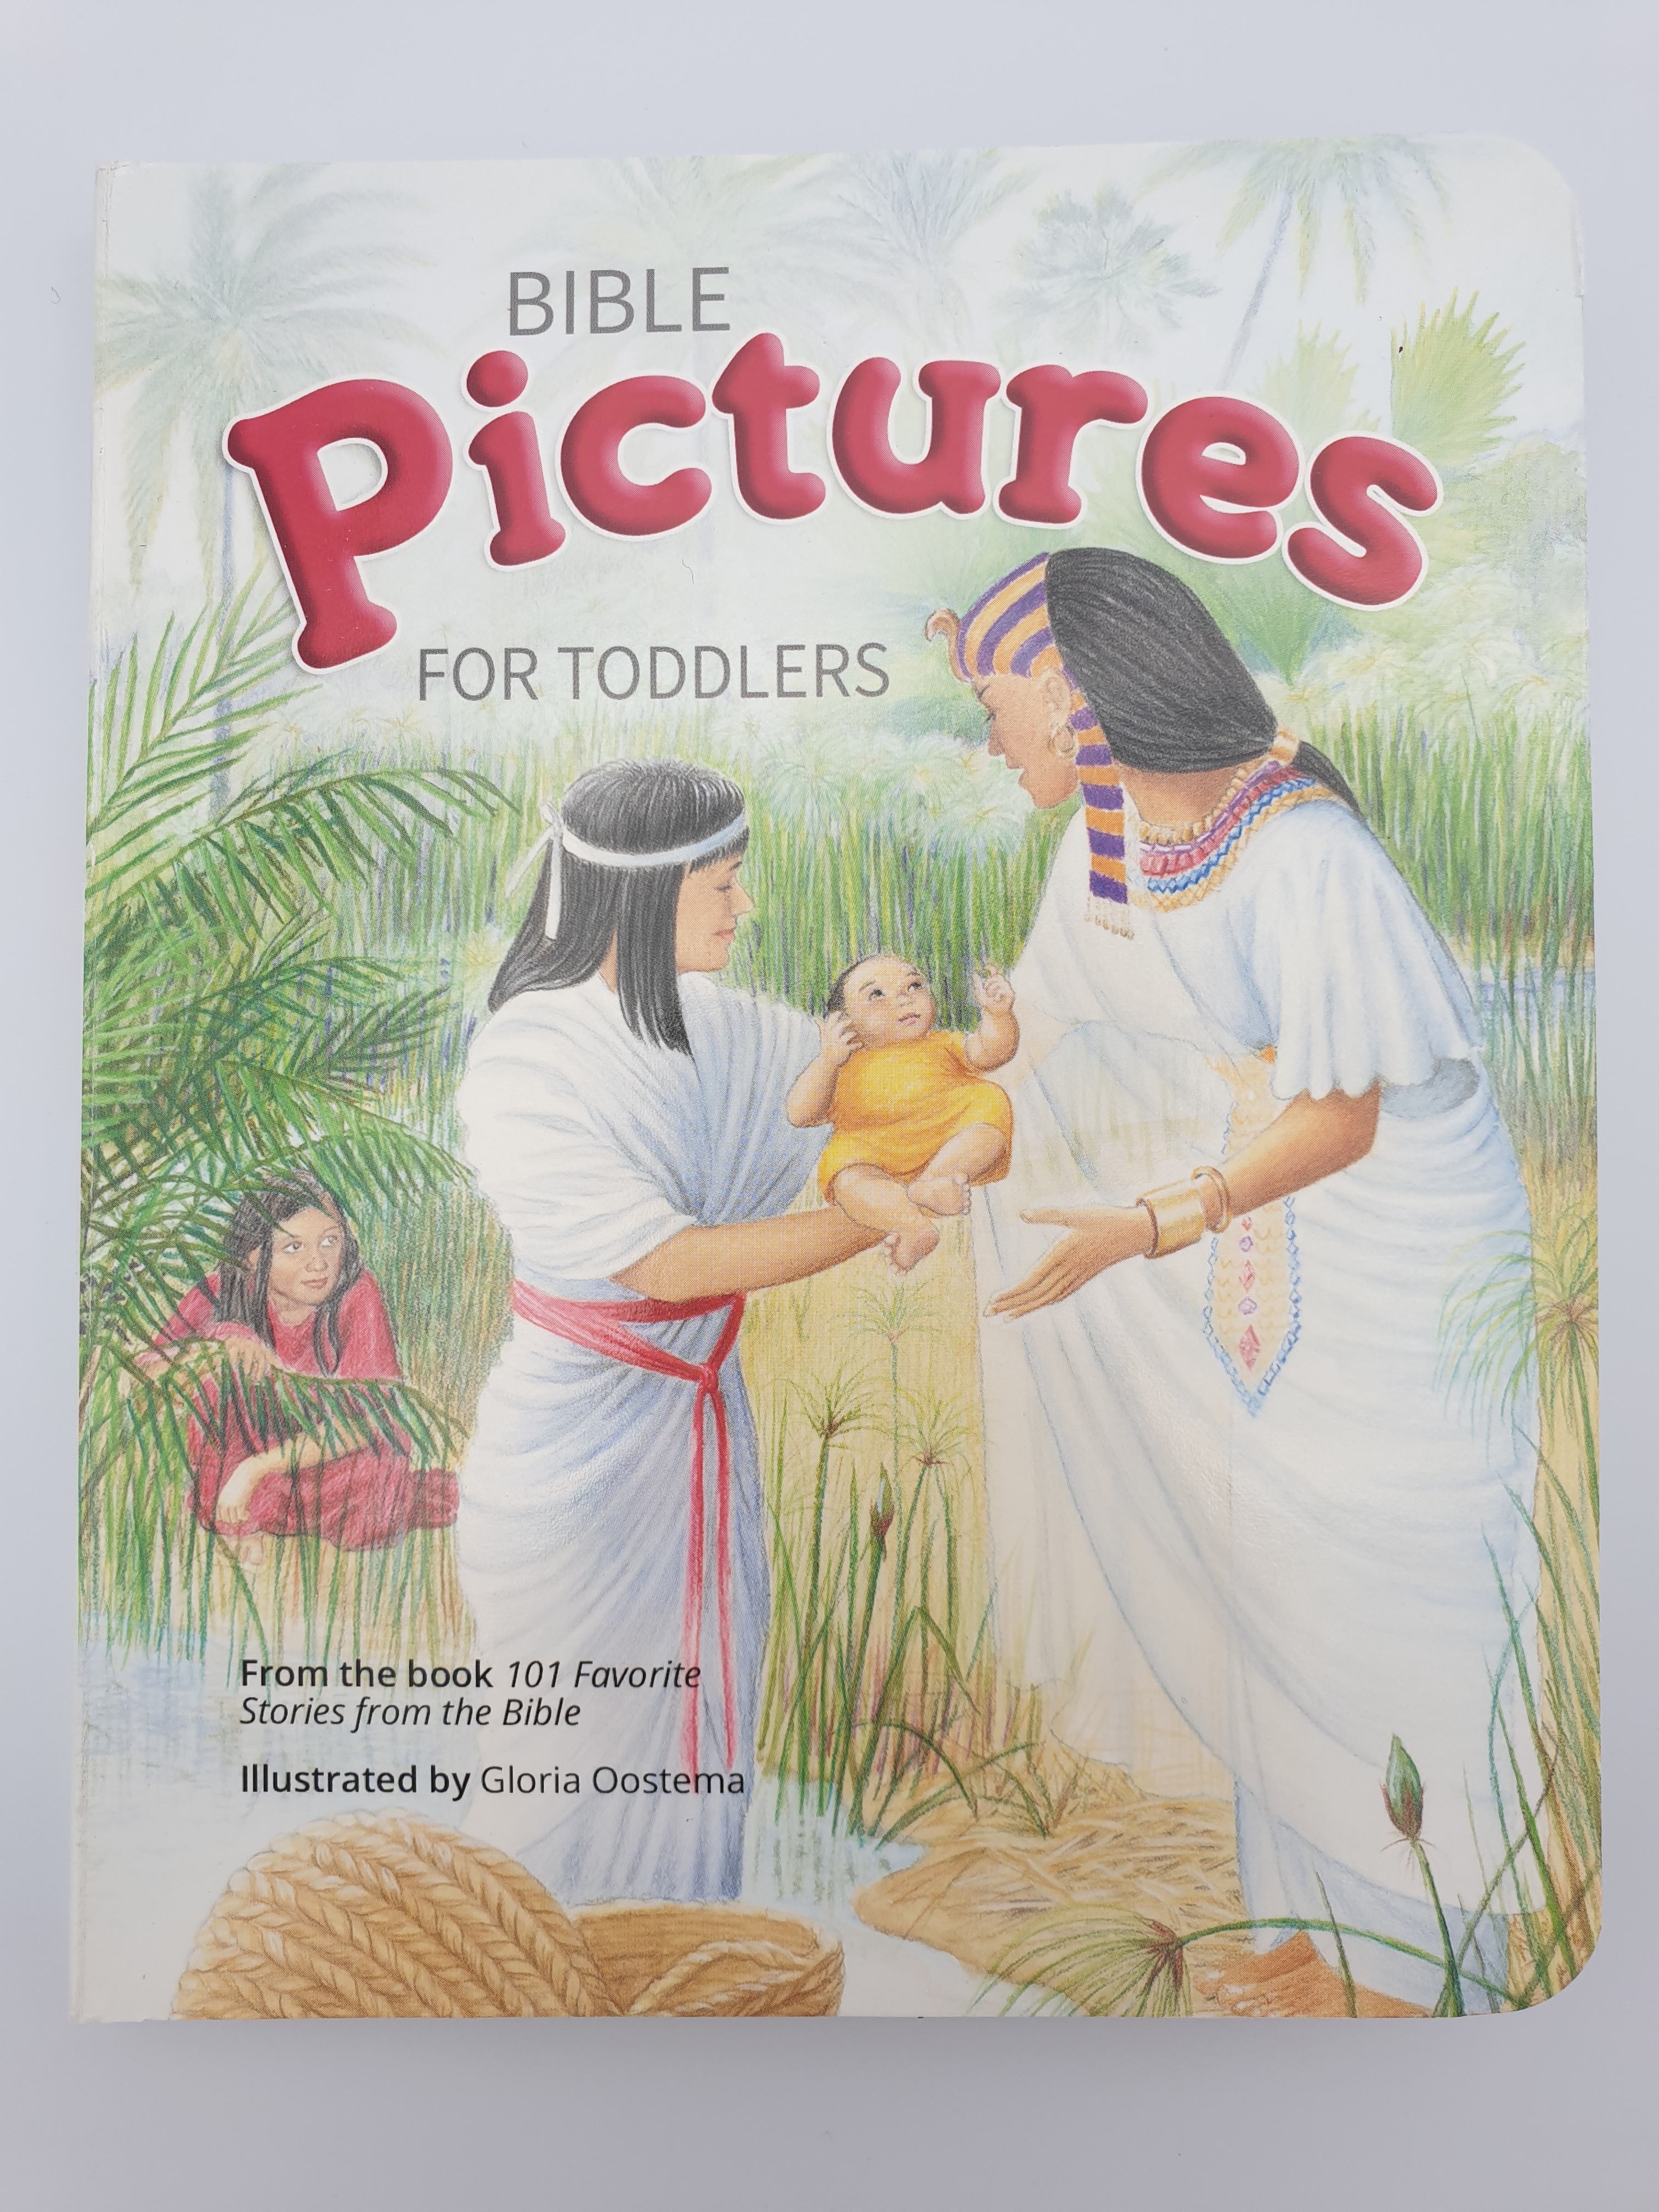 Bible Pictures for toddlers - From the book 101 Favorite Stories from the Bible 8.jpg